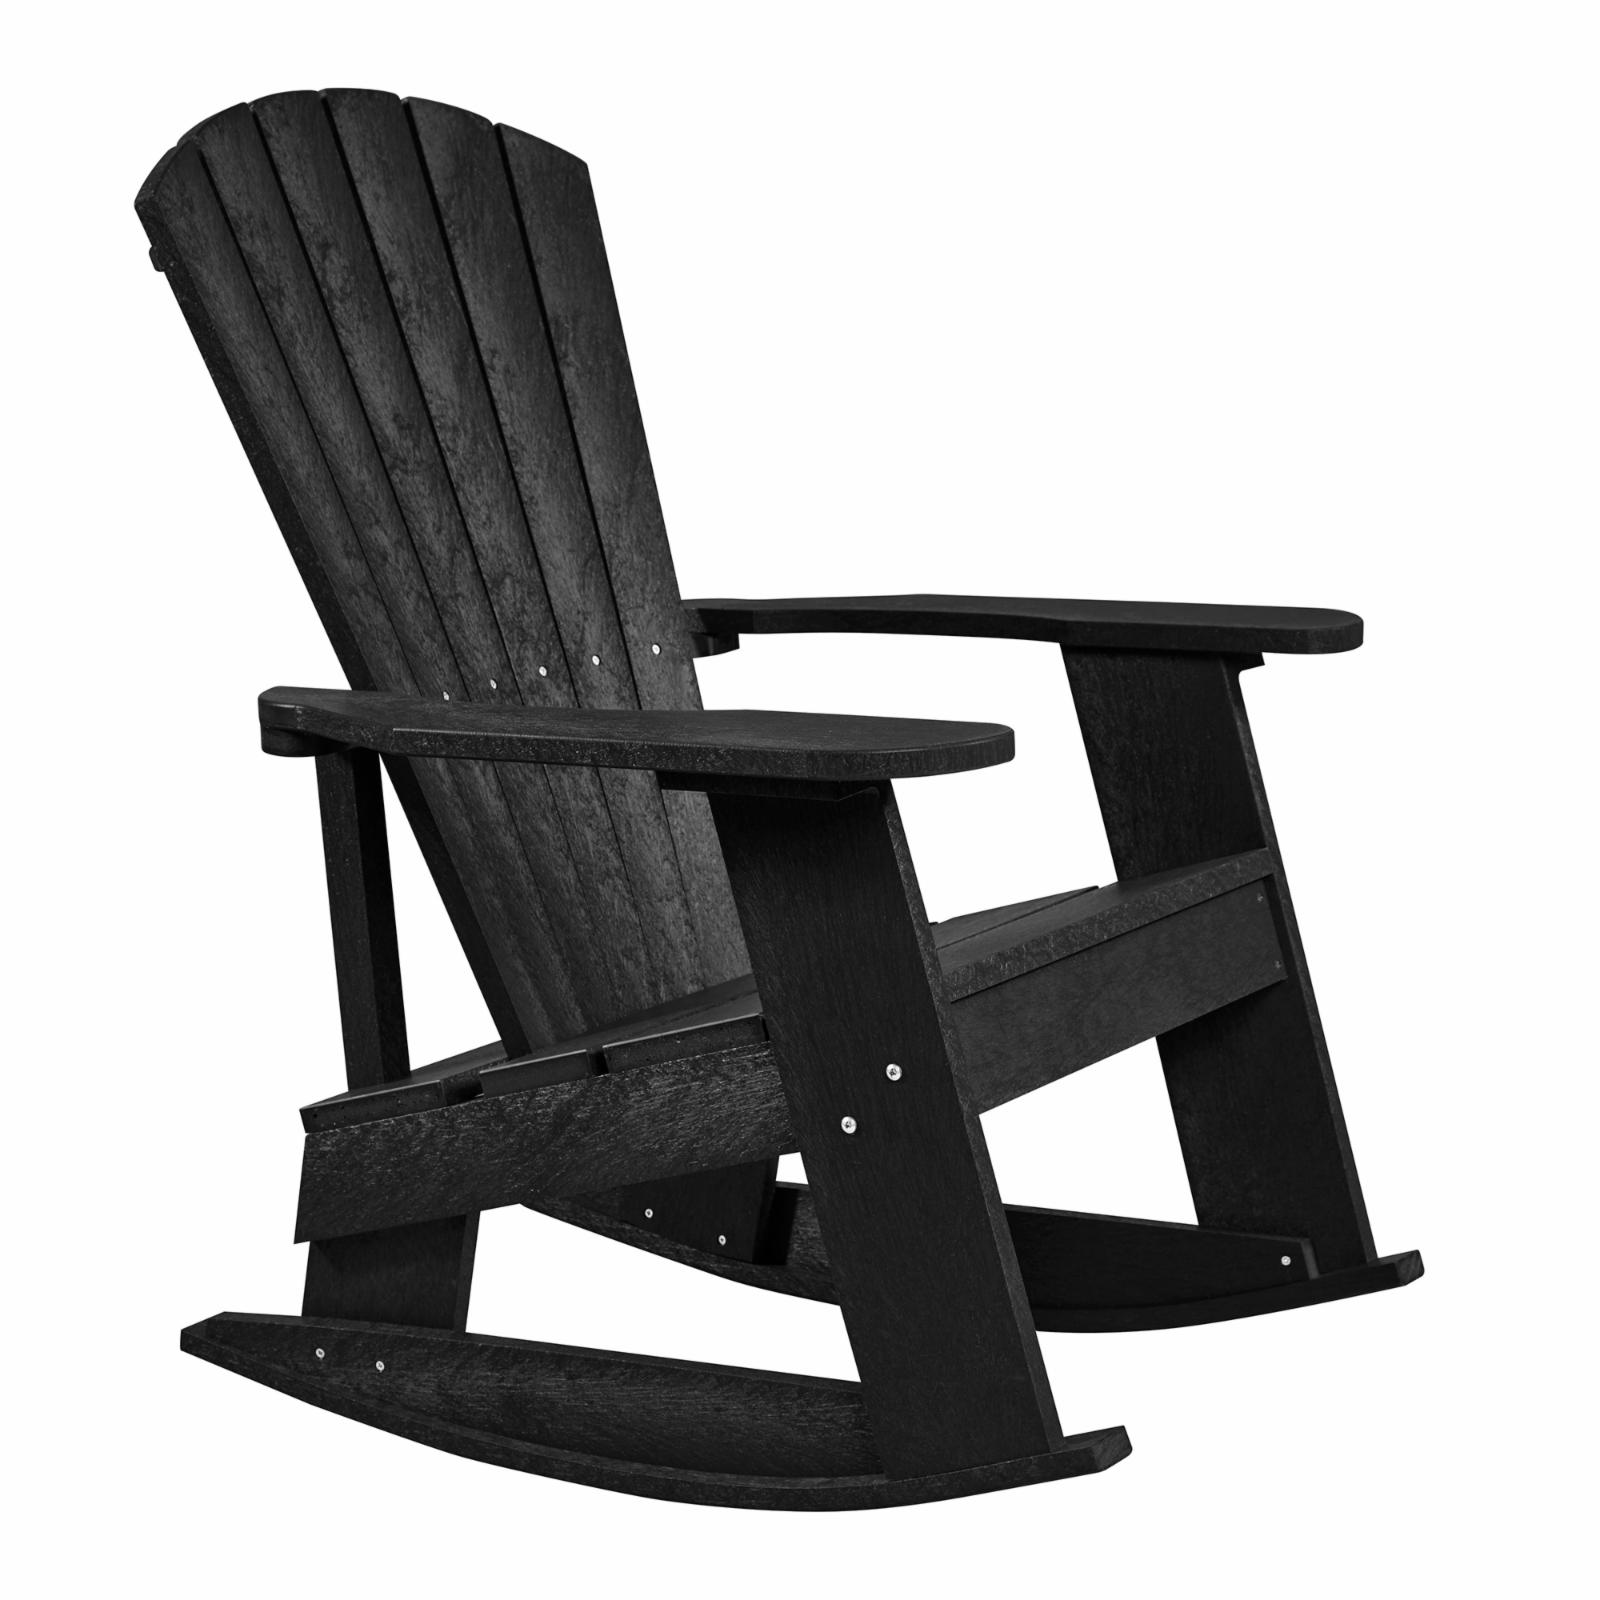 HN Outdoor Logan Recycled Plastic Adirondack Rocking Chair - image 5 of 10